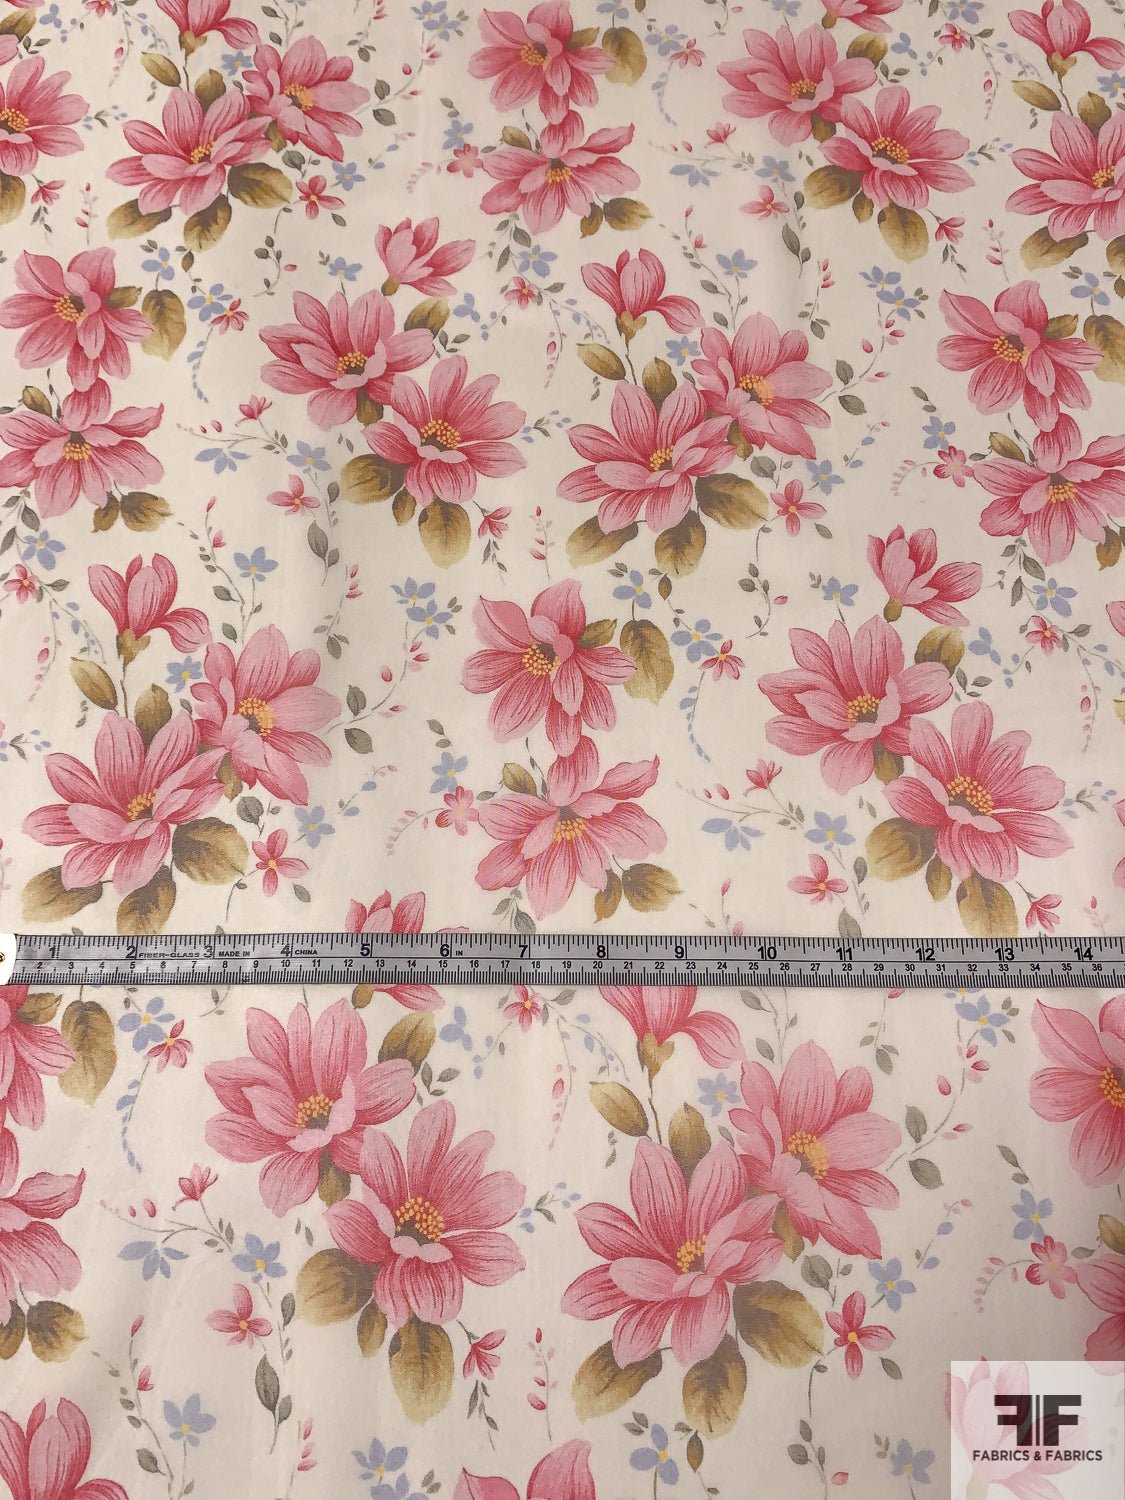 Blossomed Floral Printed Silk Chiffon - Shades of Pink / Periwinkle / Antique Gold